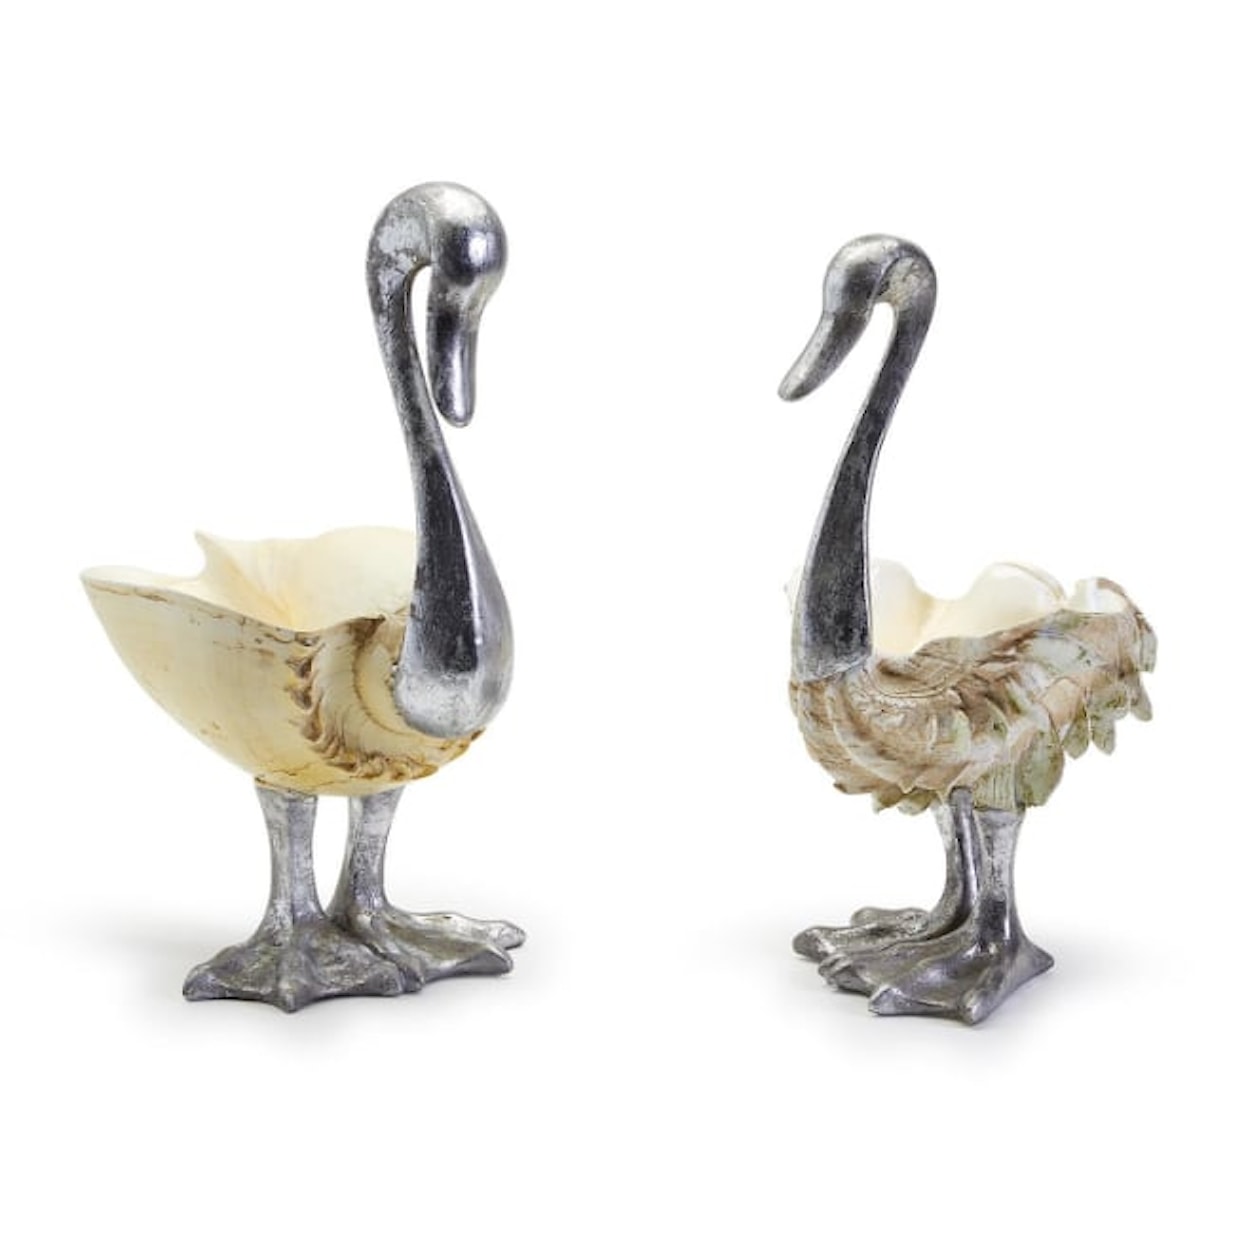 Two's Company Coastal Chic Swan Sculptures with Silver Leaf Finish